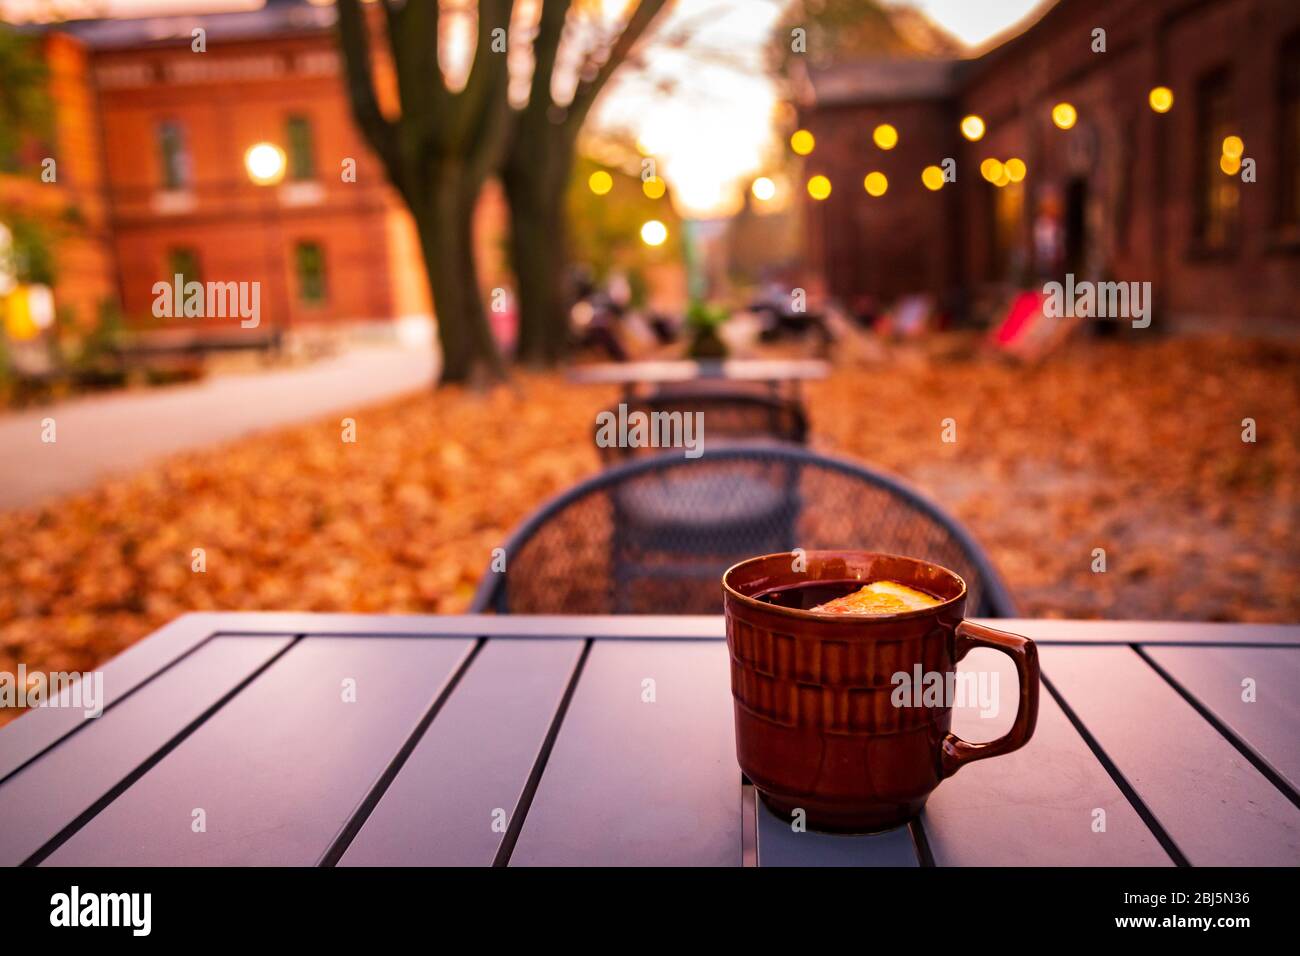 Lodz, Poland: A cup of hot drink on the table in the Ksiezy Mlyn historic distric during autumn evening Stock Photo